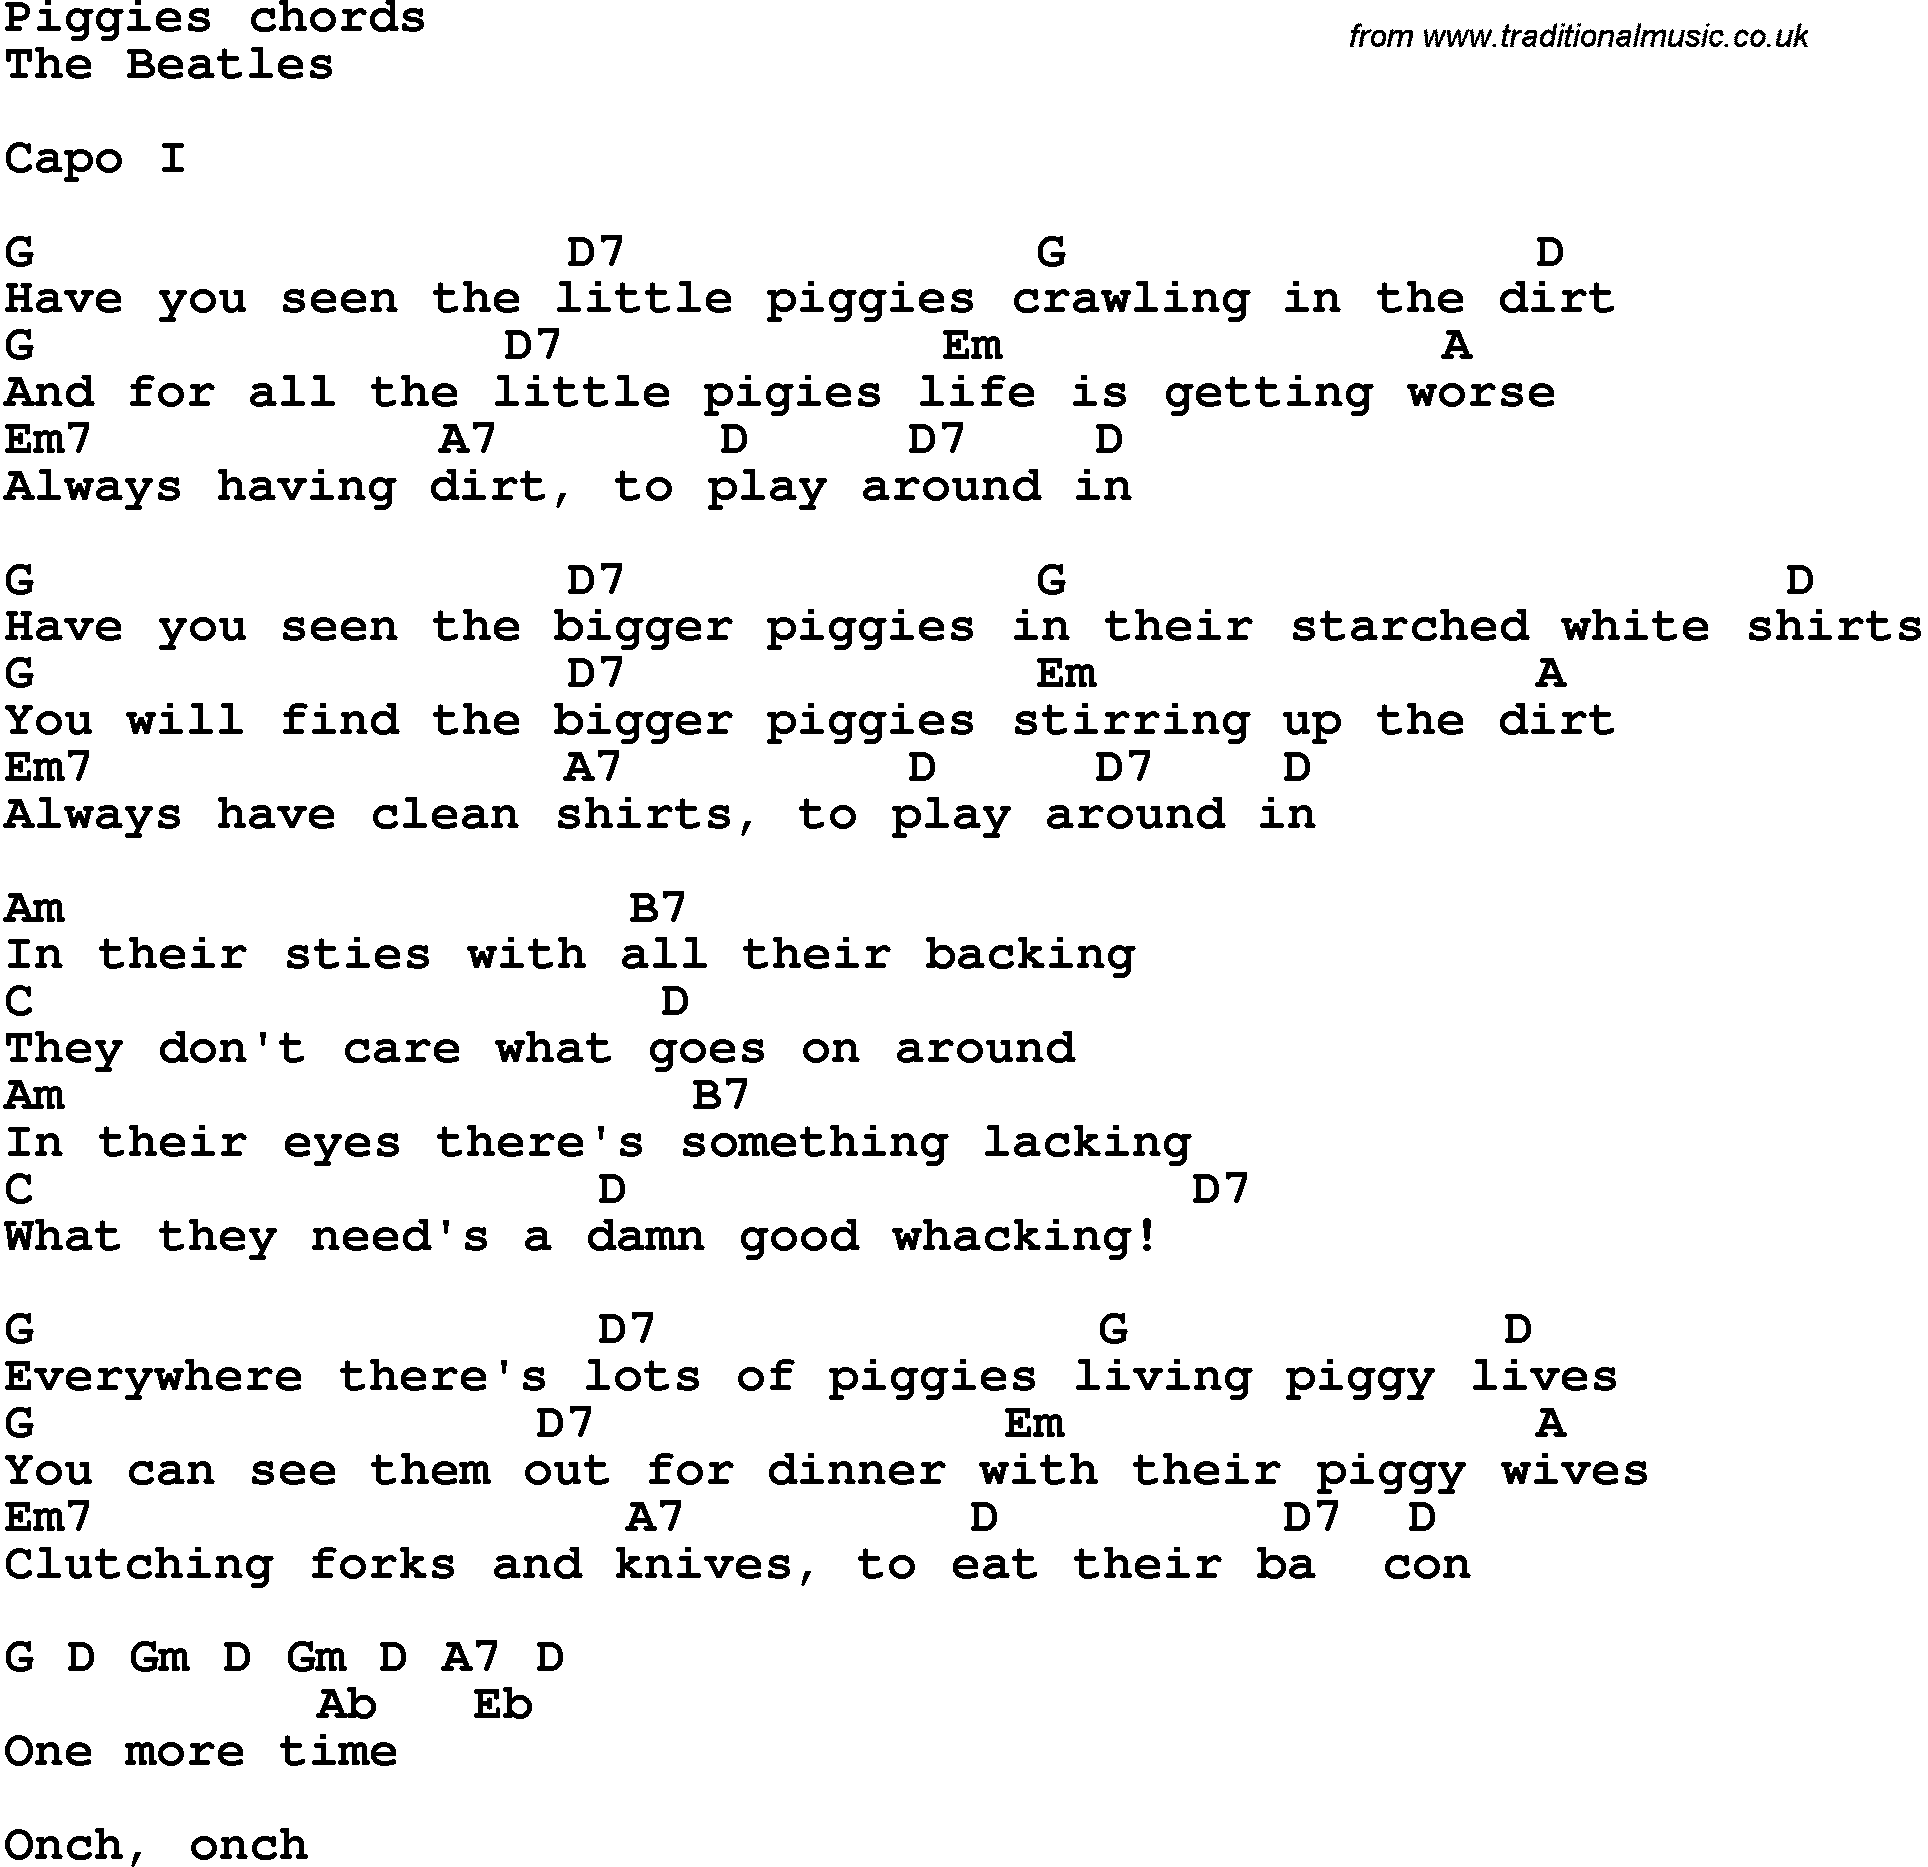 Song Lyrics with guitar chords for Piggies - The Beatles